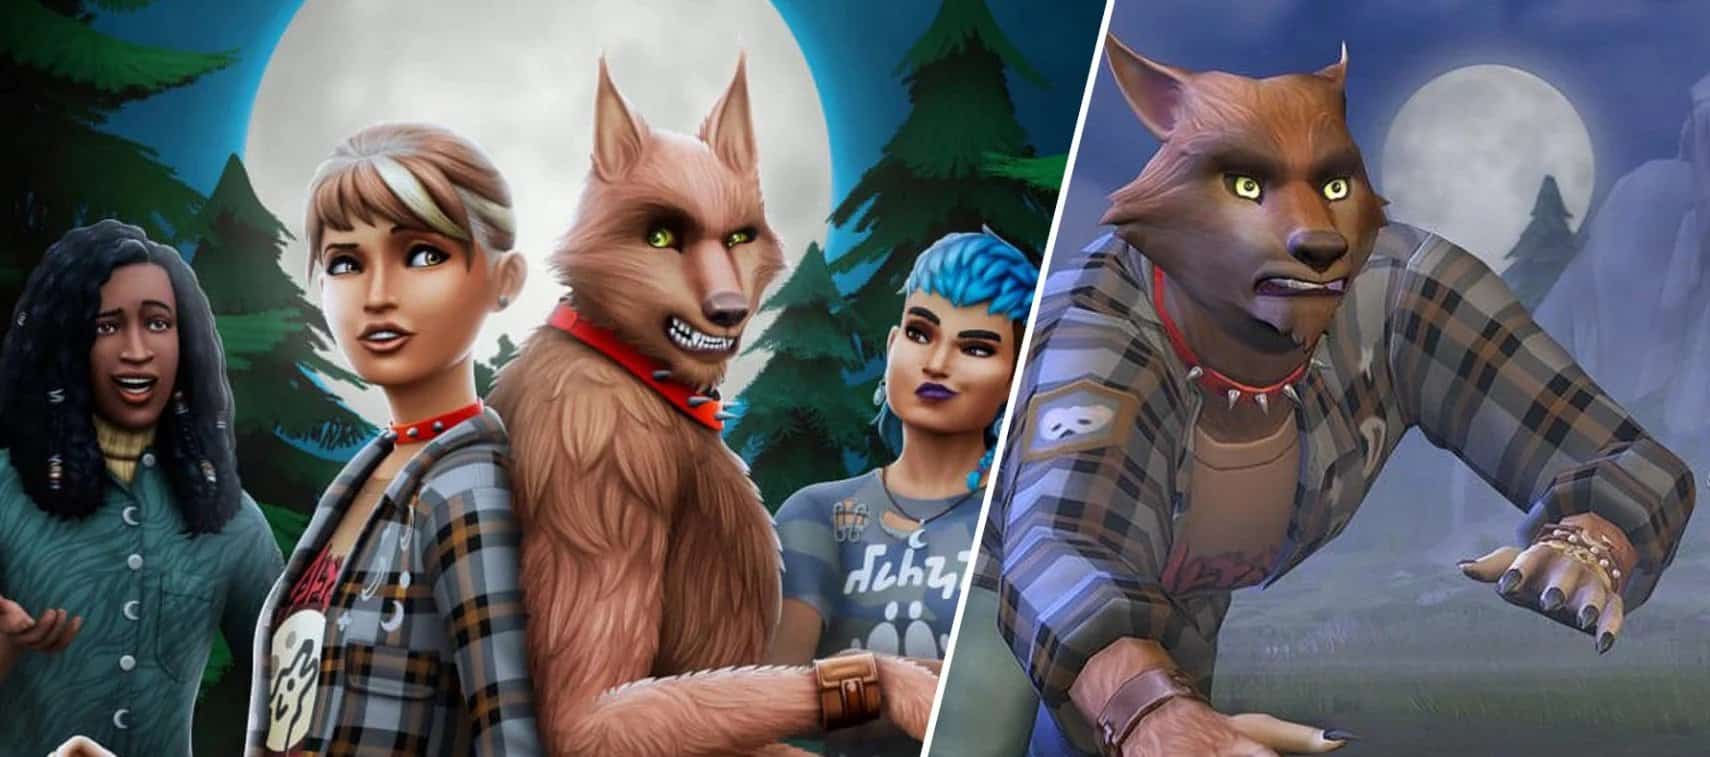 Sims 4 Werewolf pack release date and time - Twelve 27 Shop